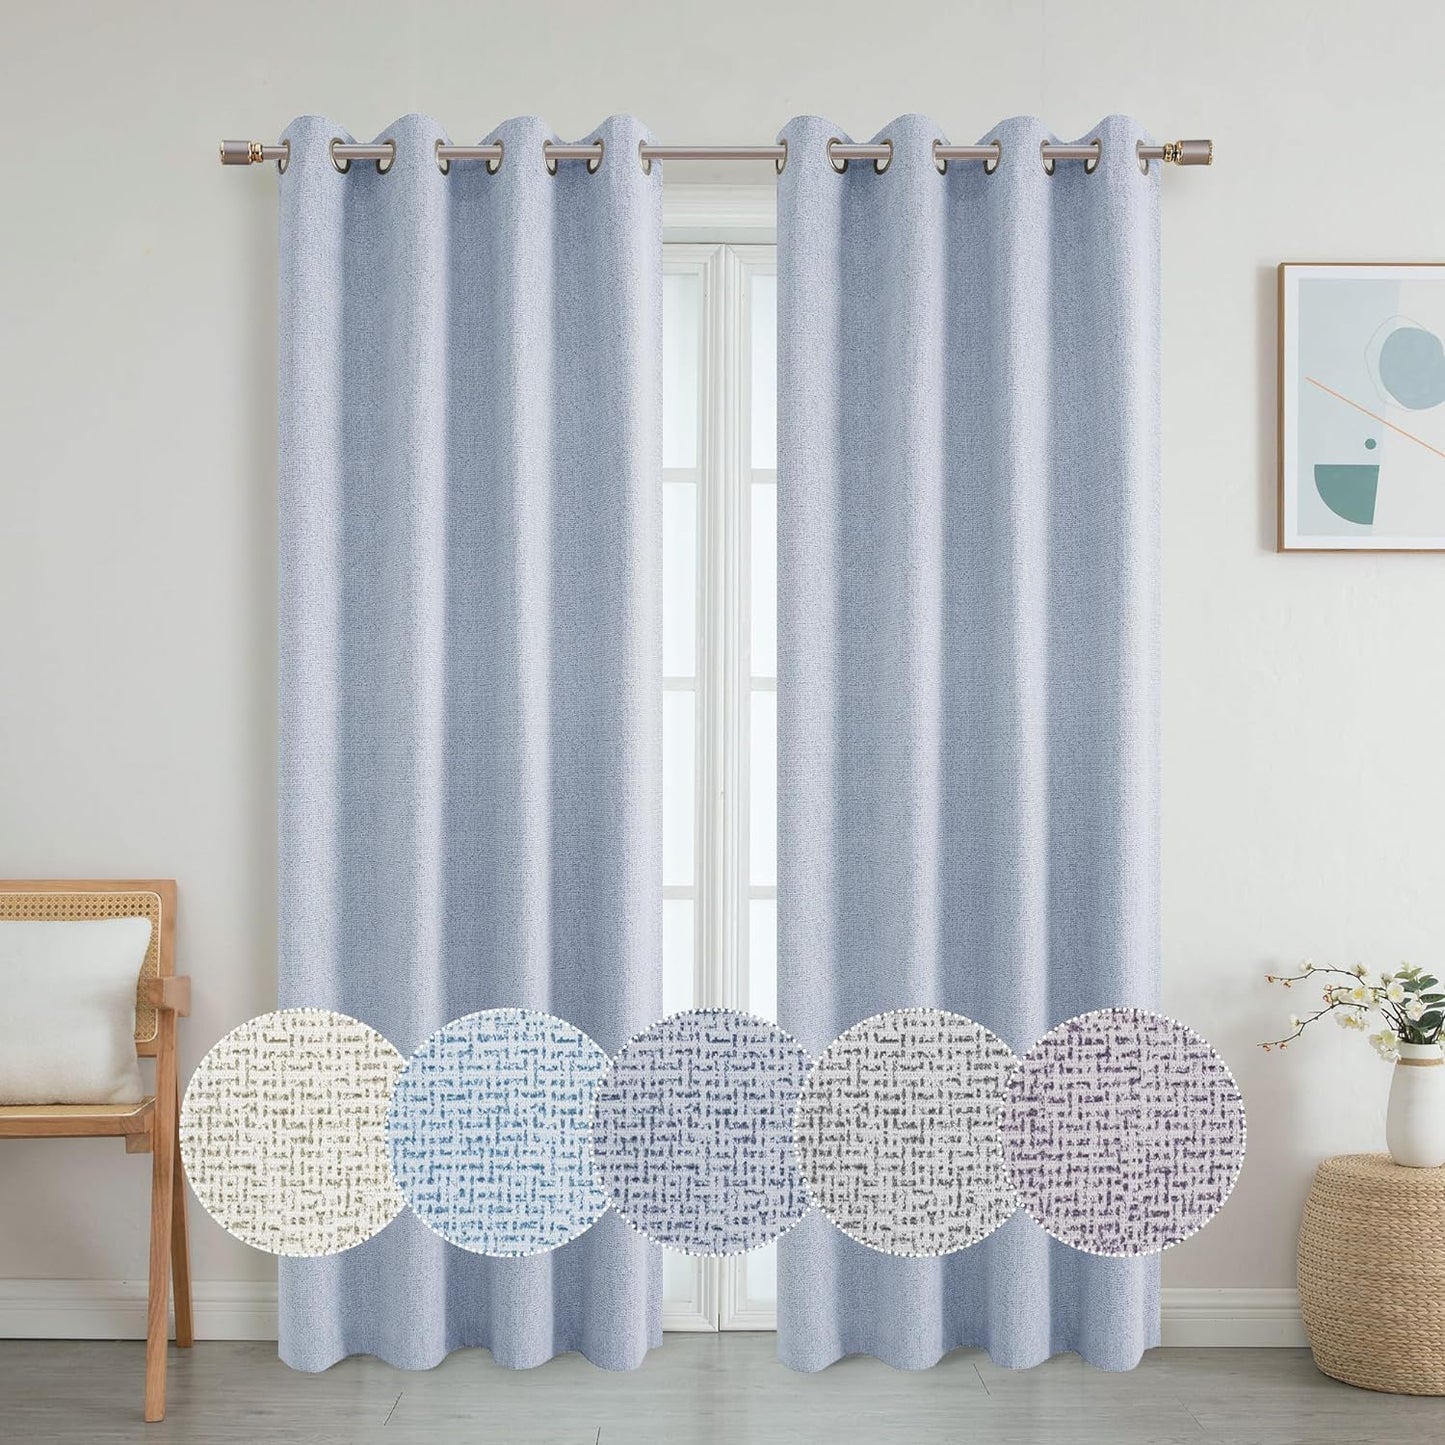 OWENIE Luke Black Out Curtains 63 Inch Long 2 Panels for Bedroom, Geometric Printed Completely Blackout Room Darkening Curtains, Grommet Thermal Insulated Living Room Curtain, 2 PCS, Each 42Wx63L Inch  OWENIE Light Blue 42"W X 84"L | 2 Pcs 